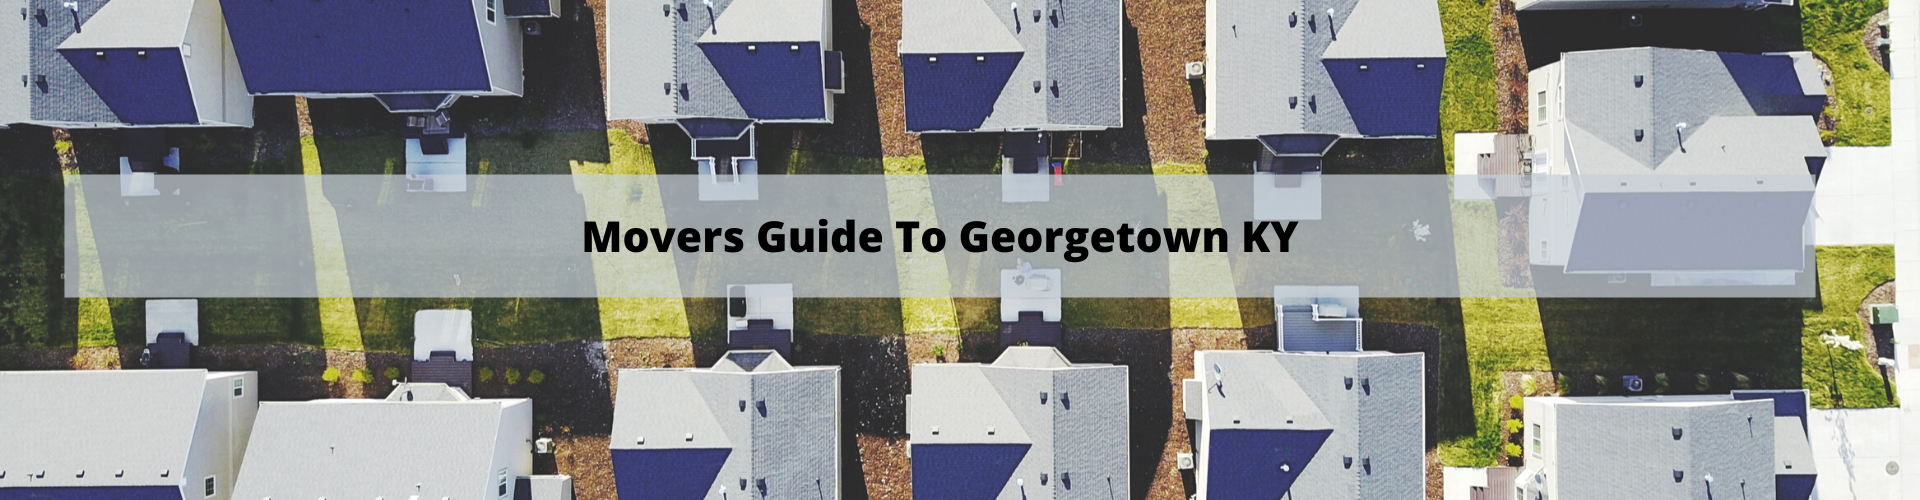 Georgetown KY Movers Guide